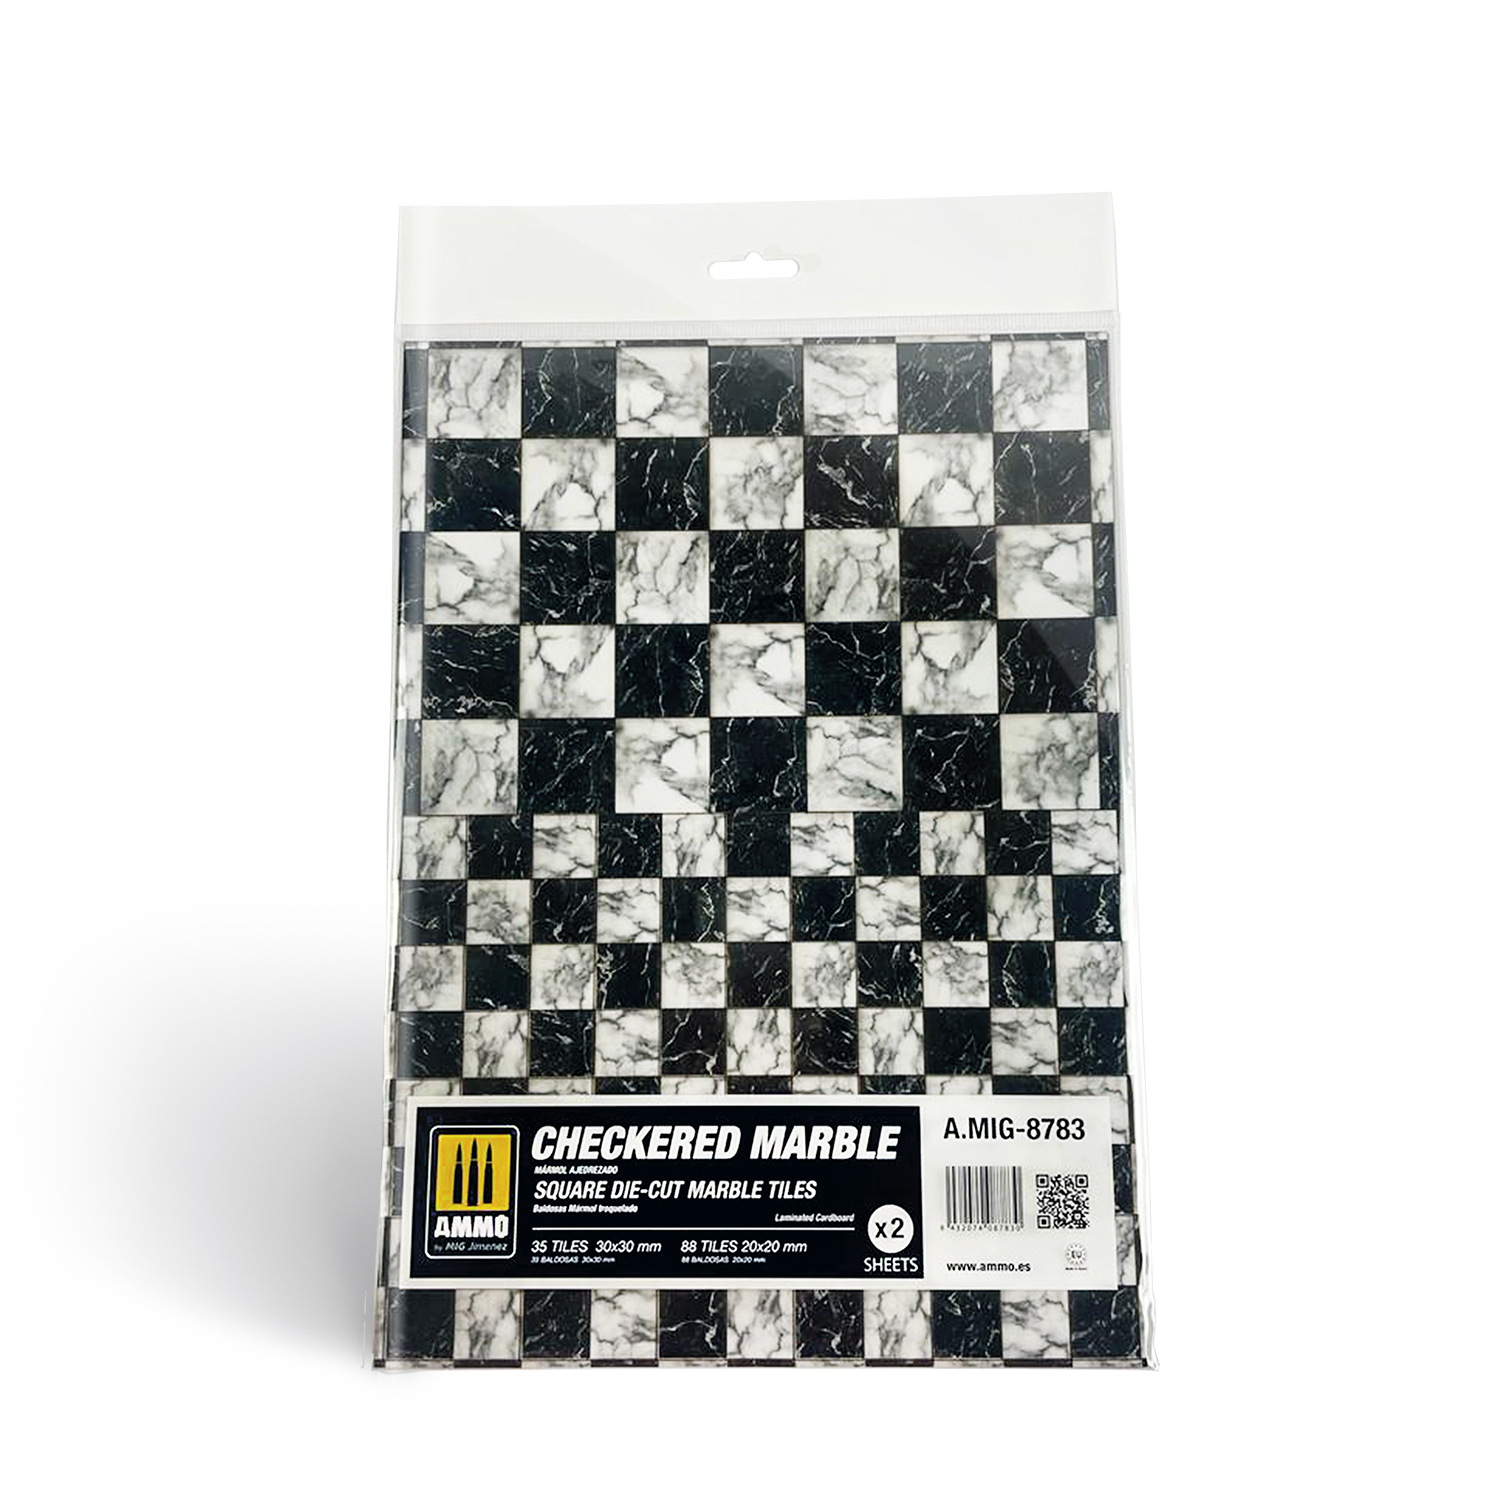 MIG8783 Checkered Marble. Square die-cut marble tiles